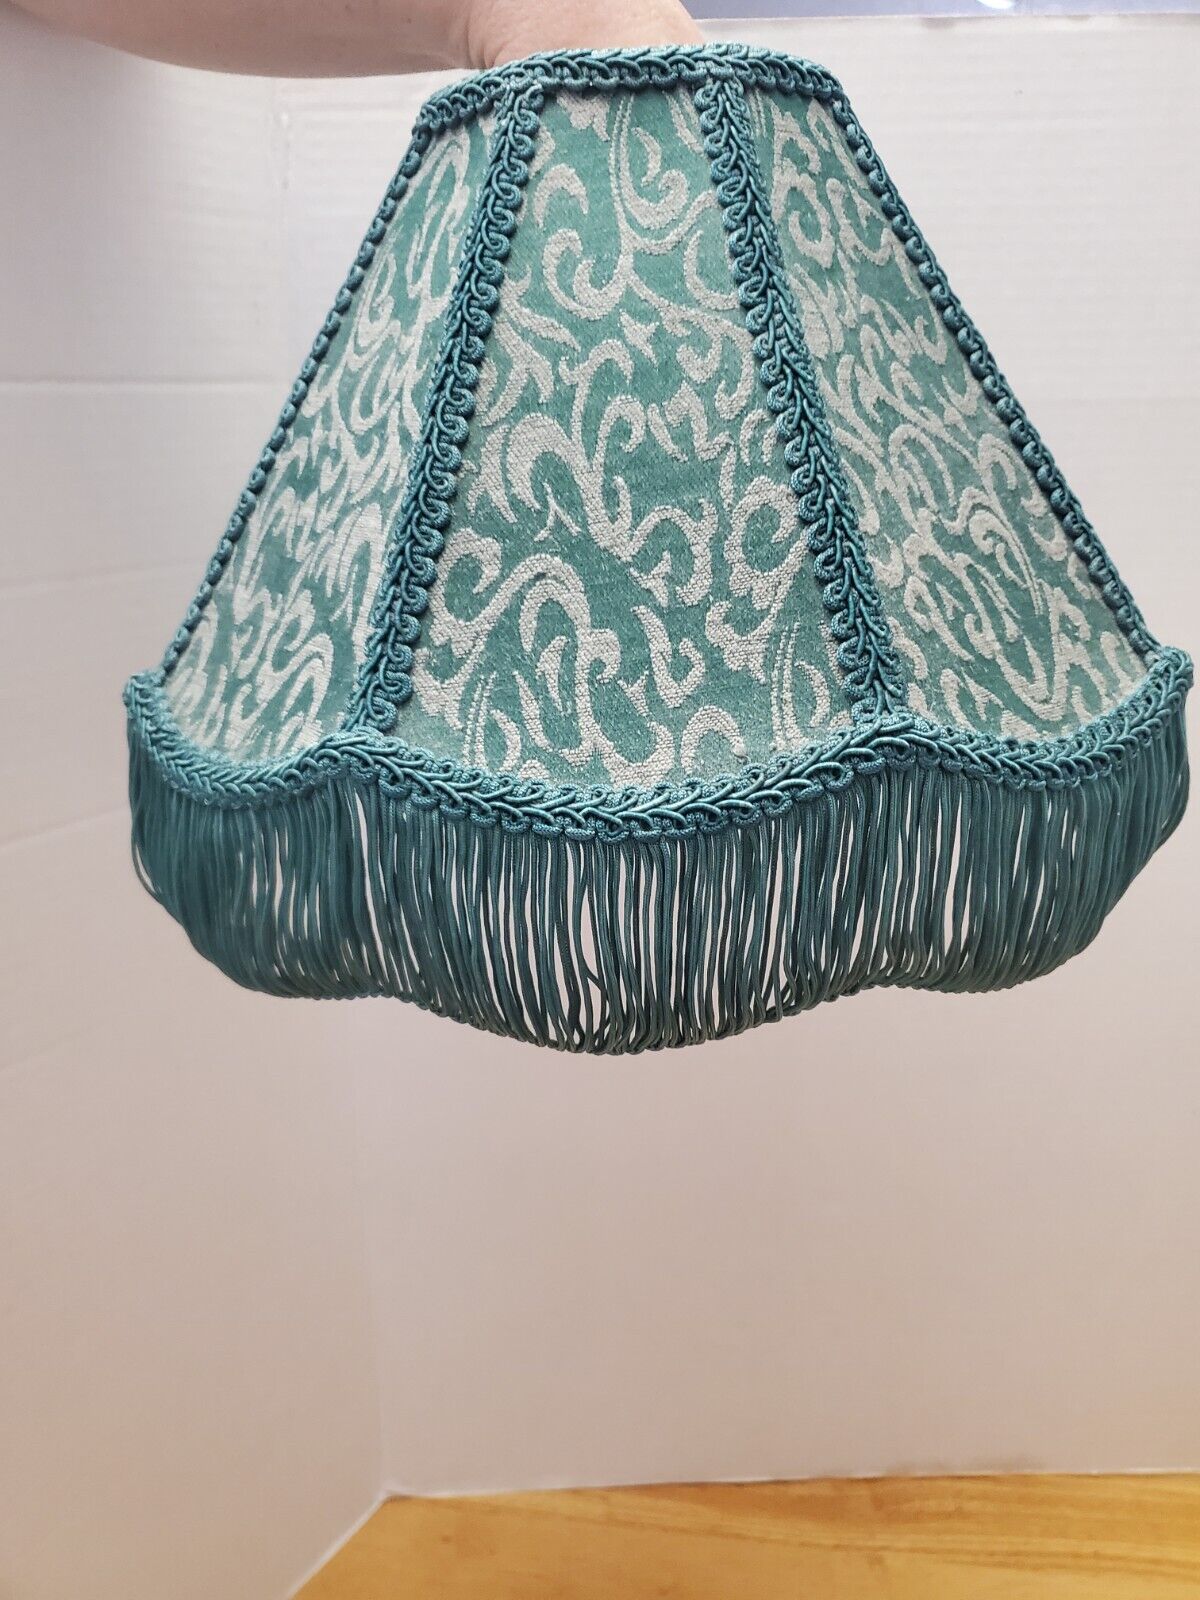 Vintage Victorian Style Fabric Lamp Shade Damask Green Scallop Brocade